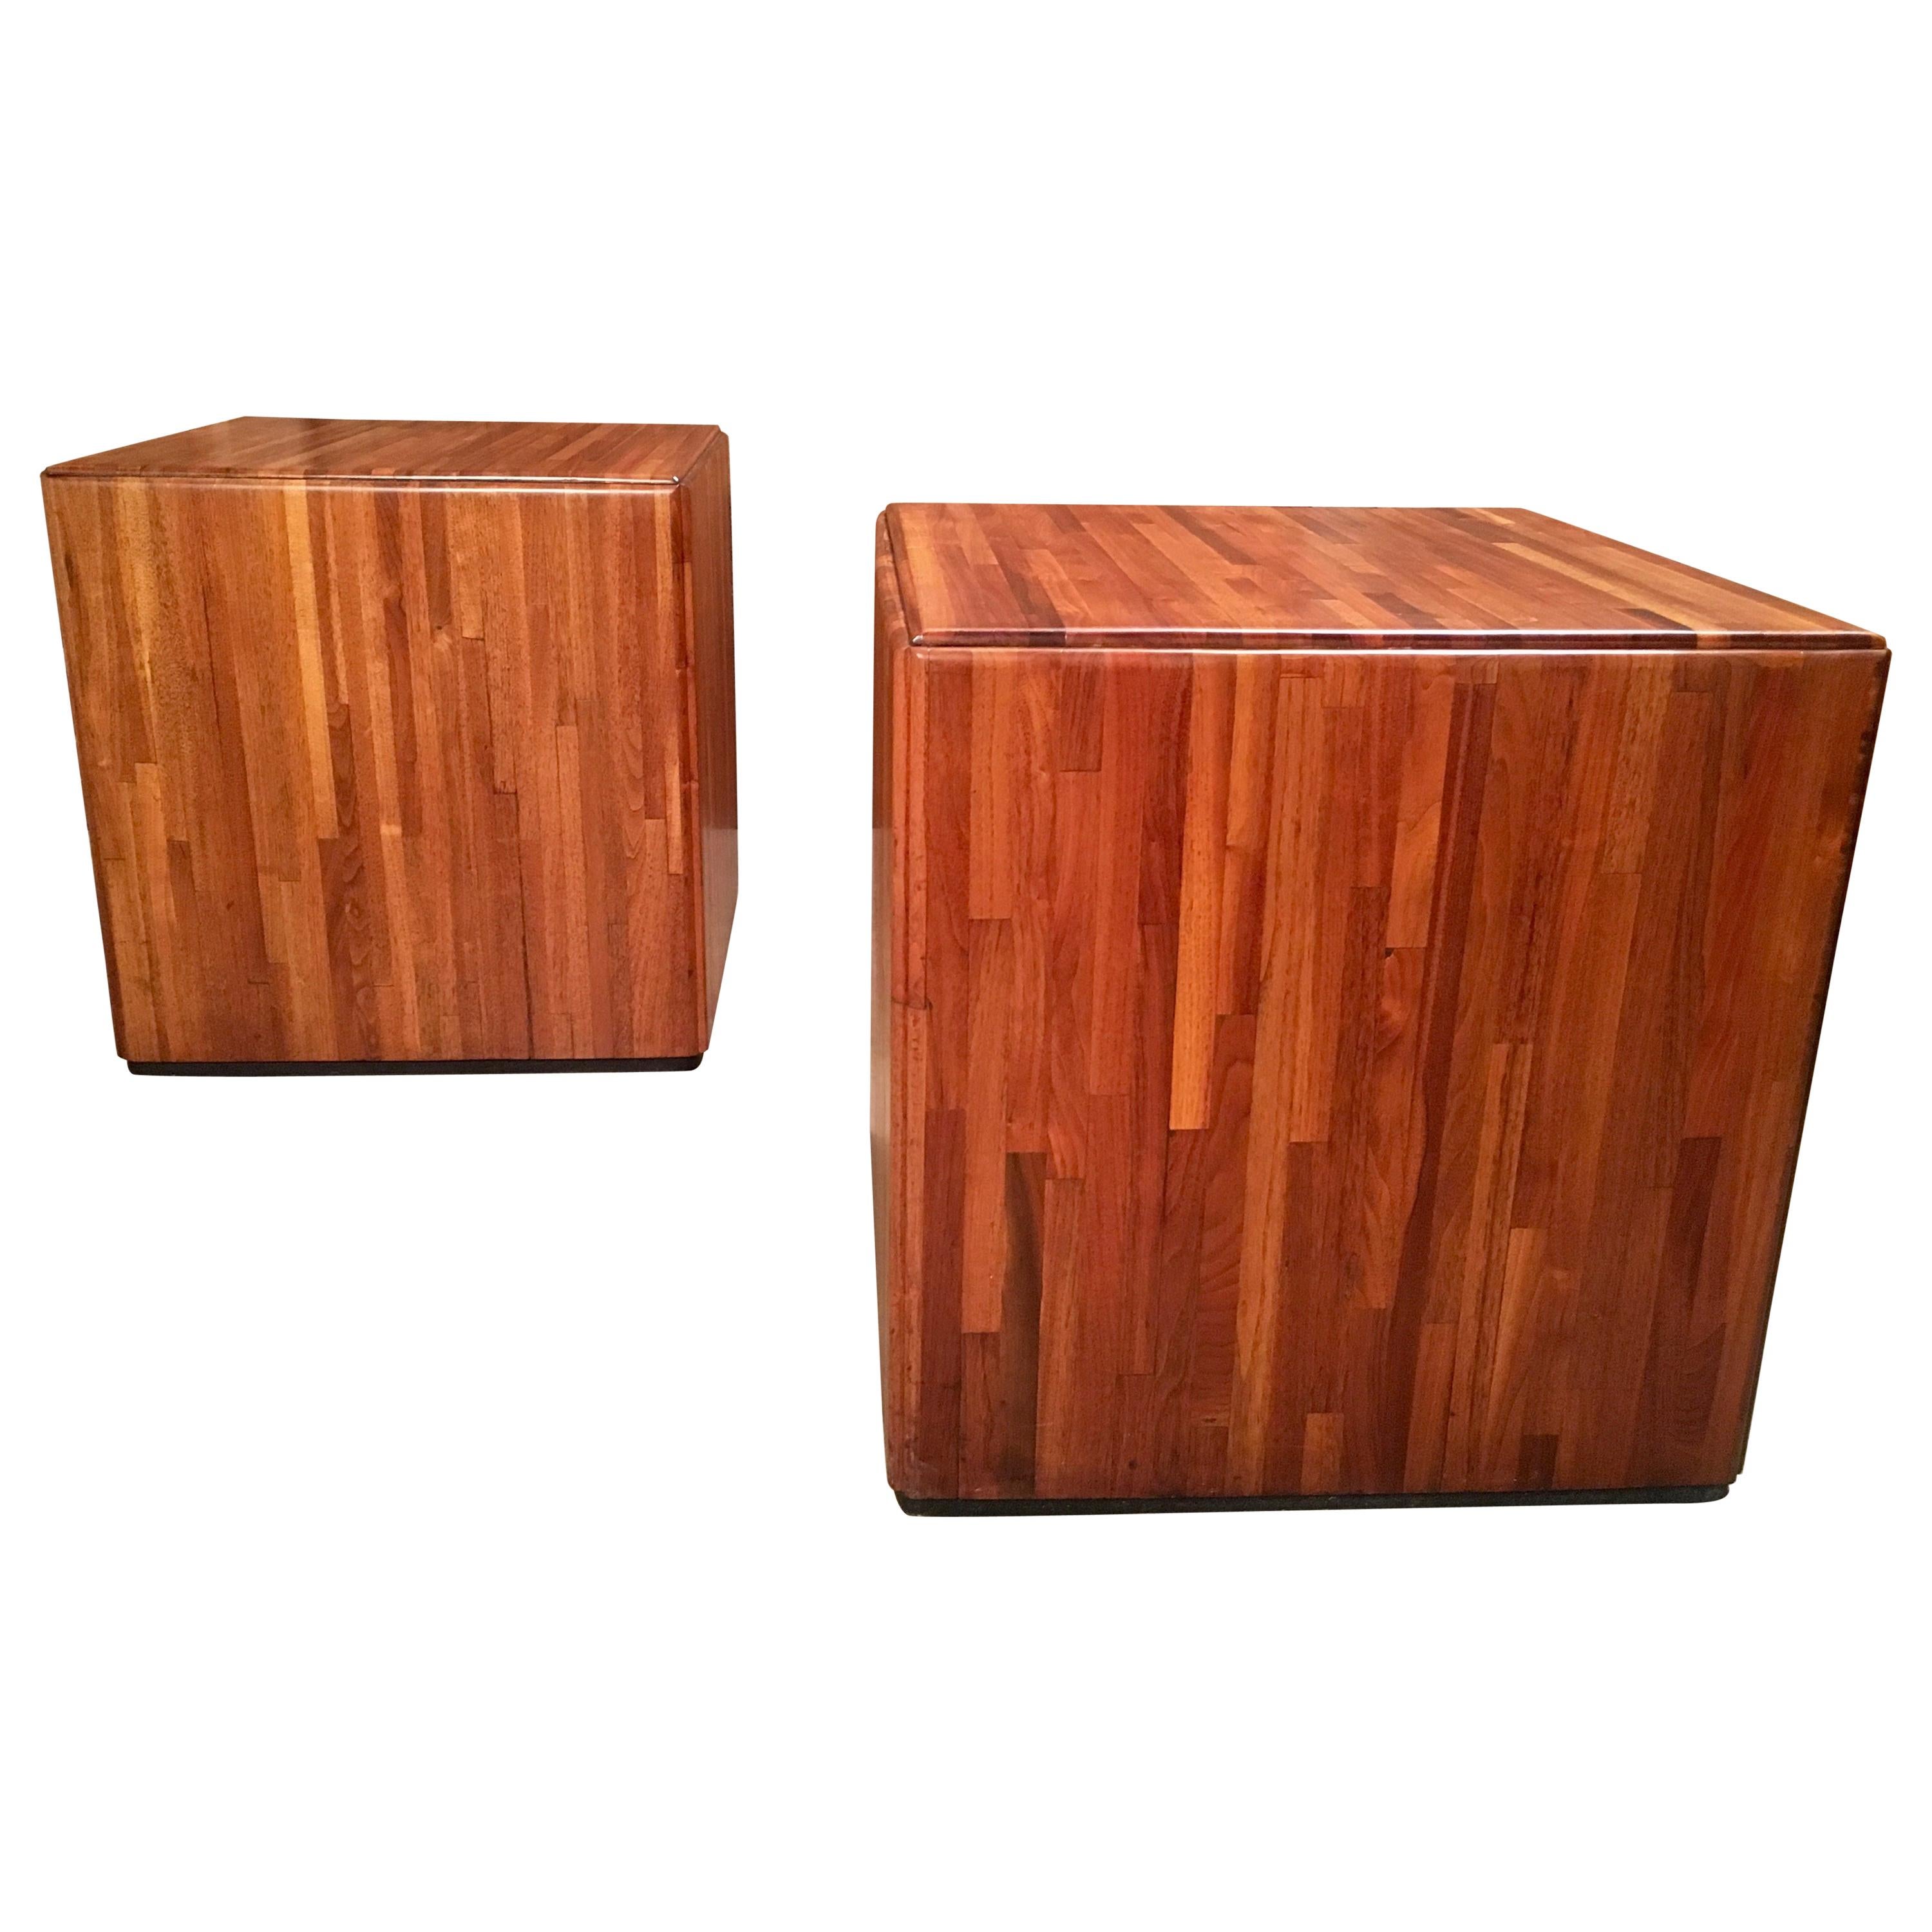 Lou Hodges Cube Tables for California Design Group